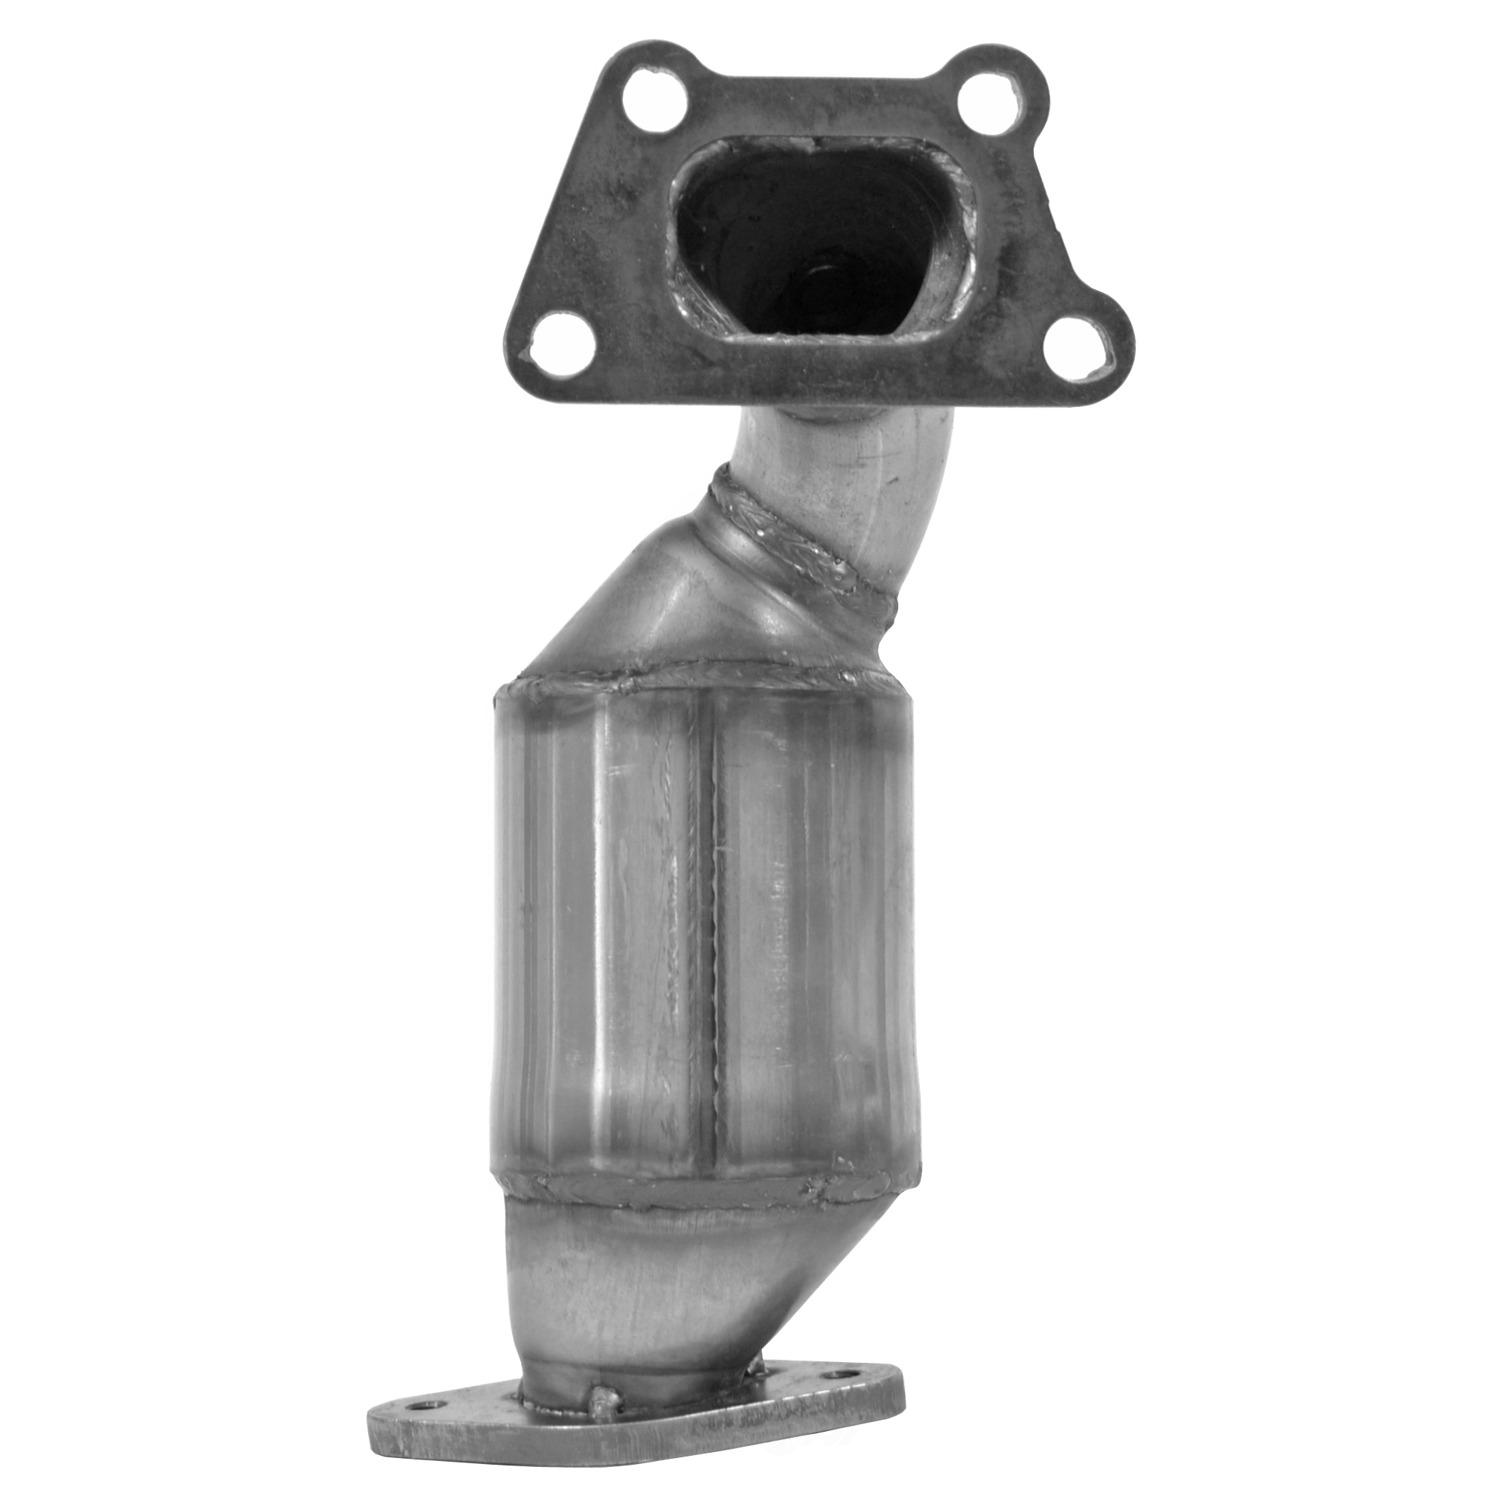 AP EXHAUST FEDERAL CONVERTER - Direct Fit Converter - APG 641450